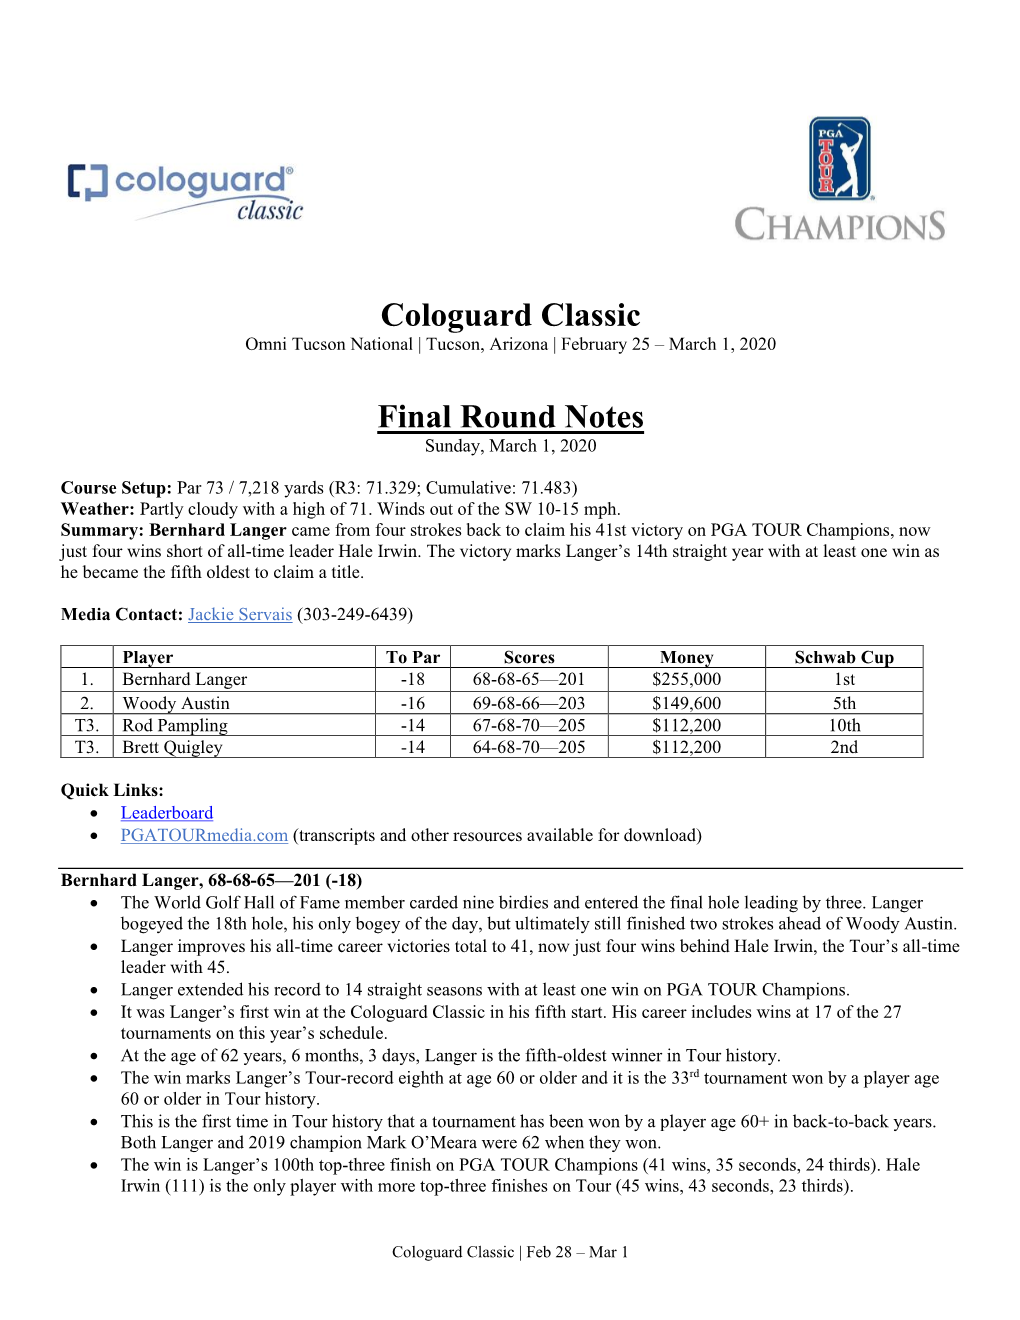 Cologuard Classic Final Round Notes